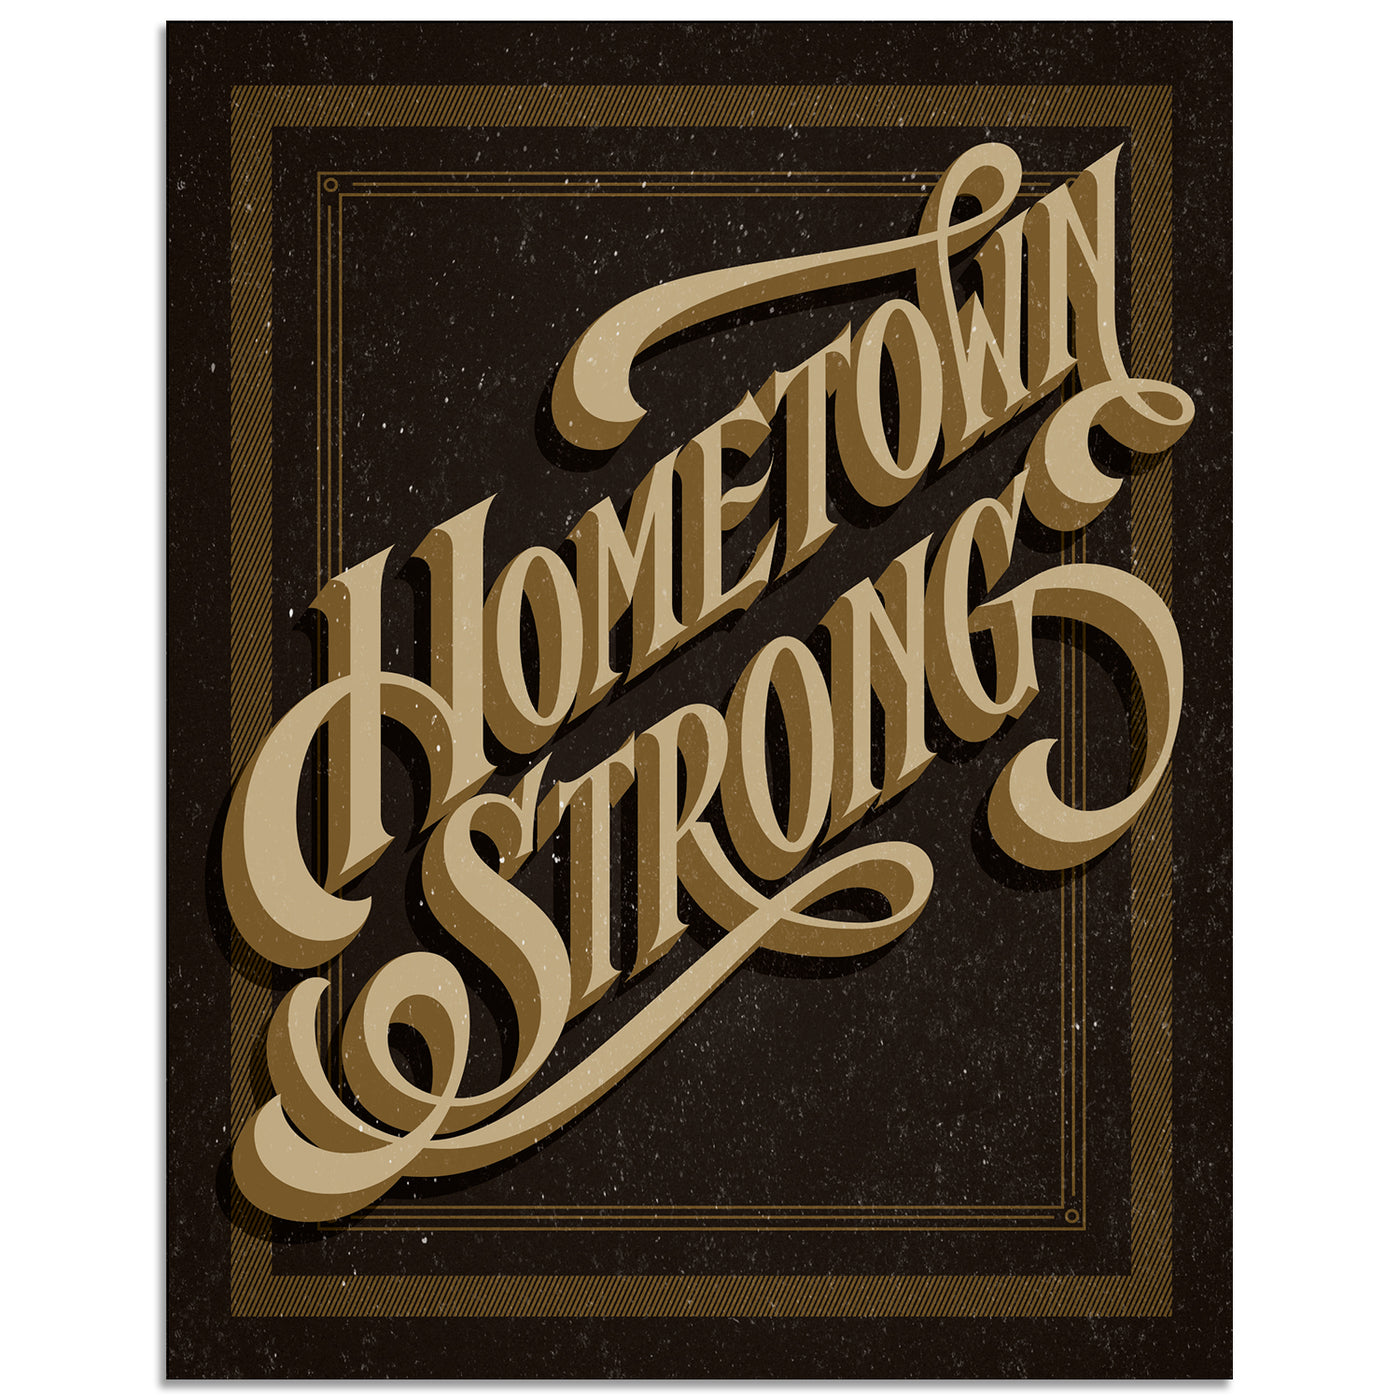 Hometown Strong Limited Edition Poster